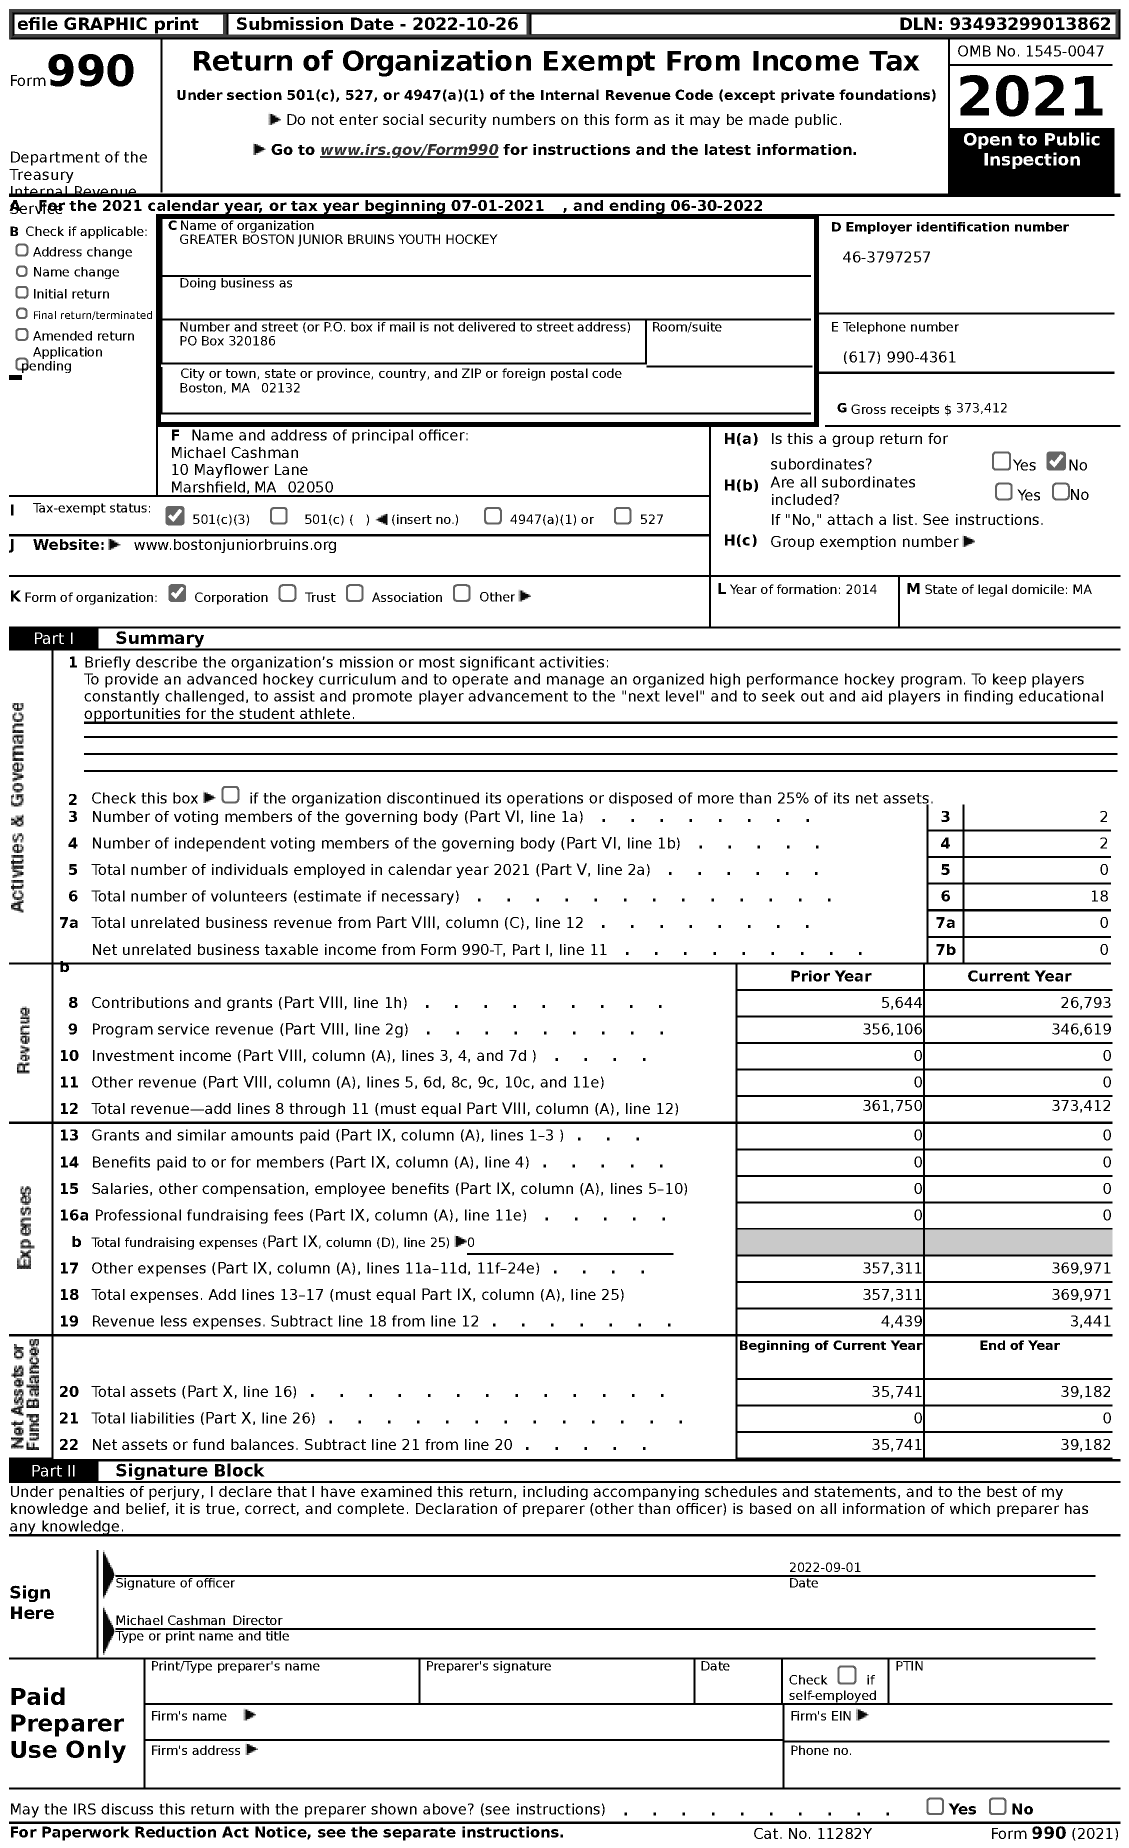 Image of first page of 2021 Form 990 for Greater Boston Junior Bruins Youth Hockey